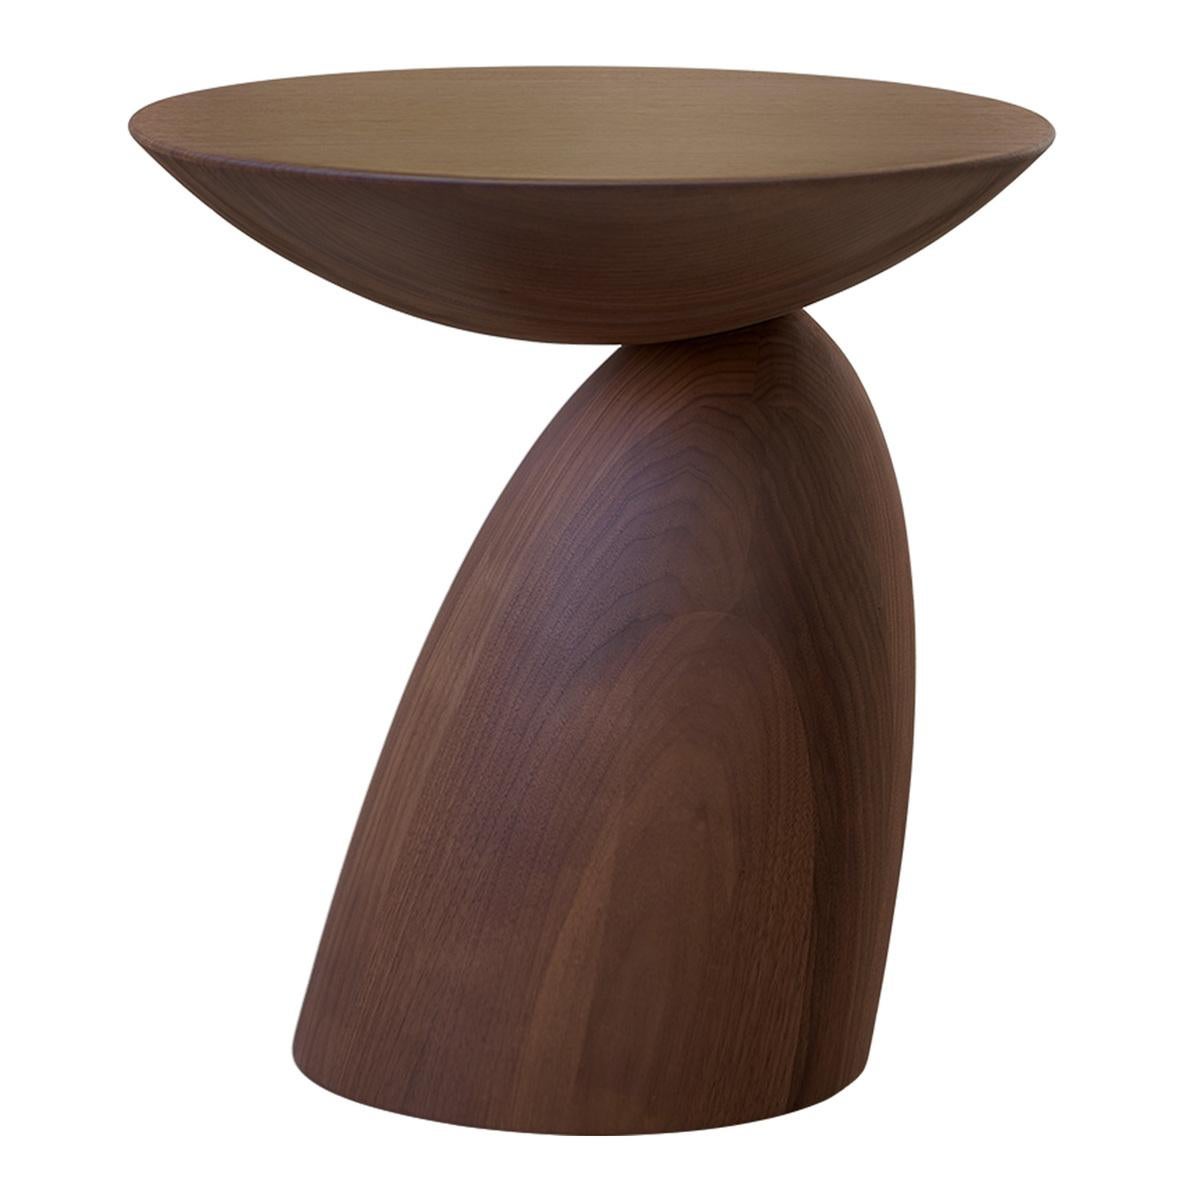 Contemporary Eero Aarnio Small Natural Parabel Table For Sale